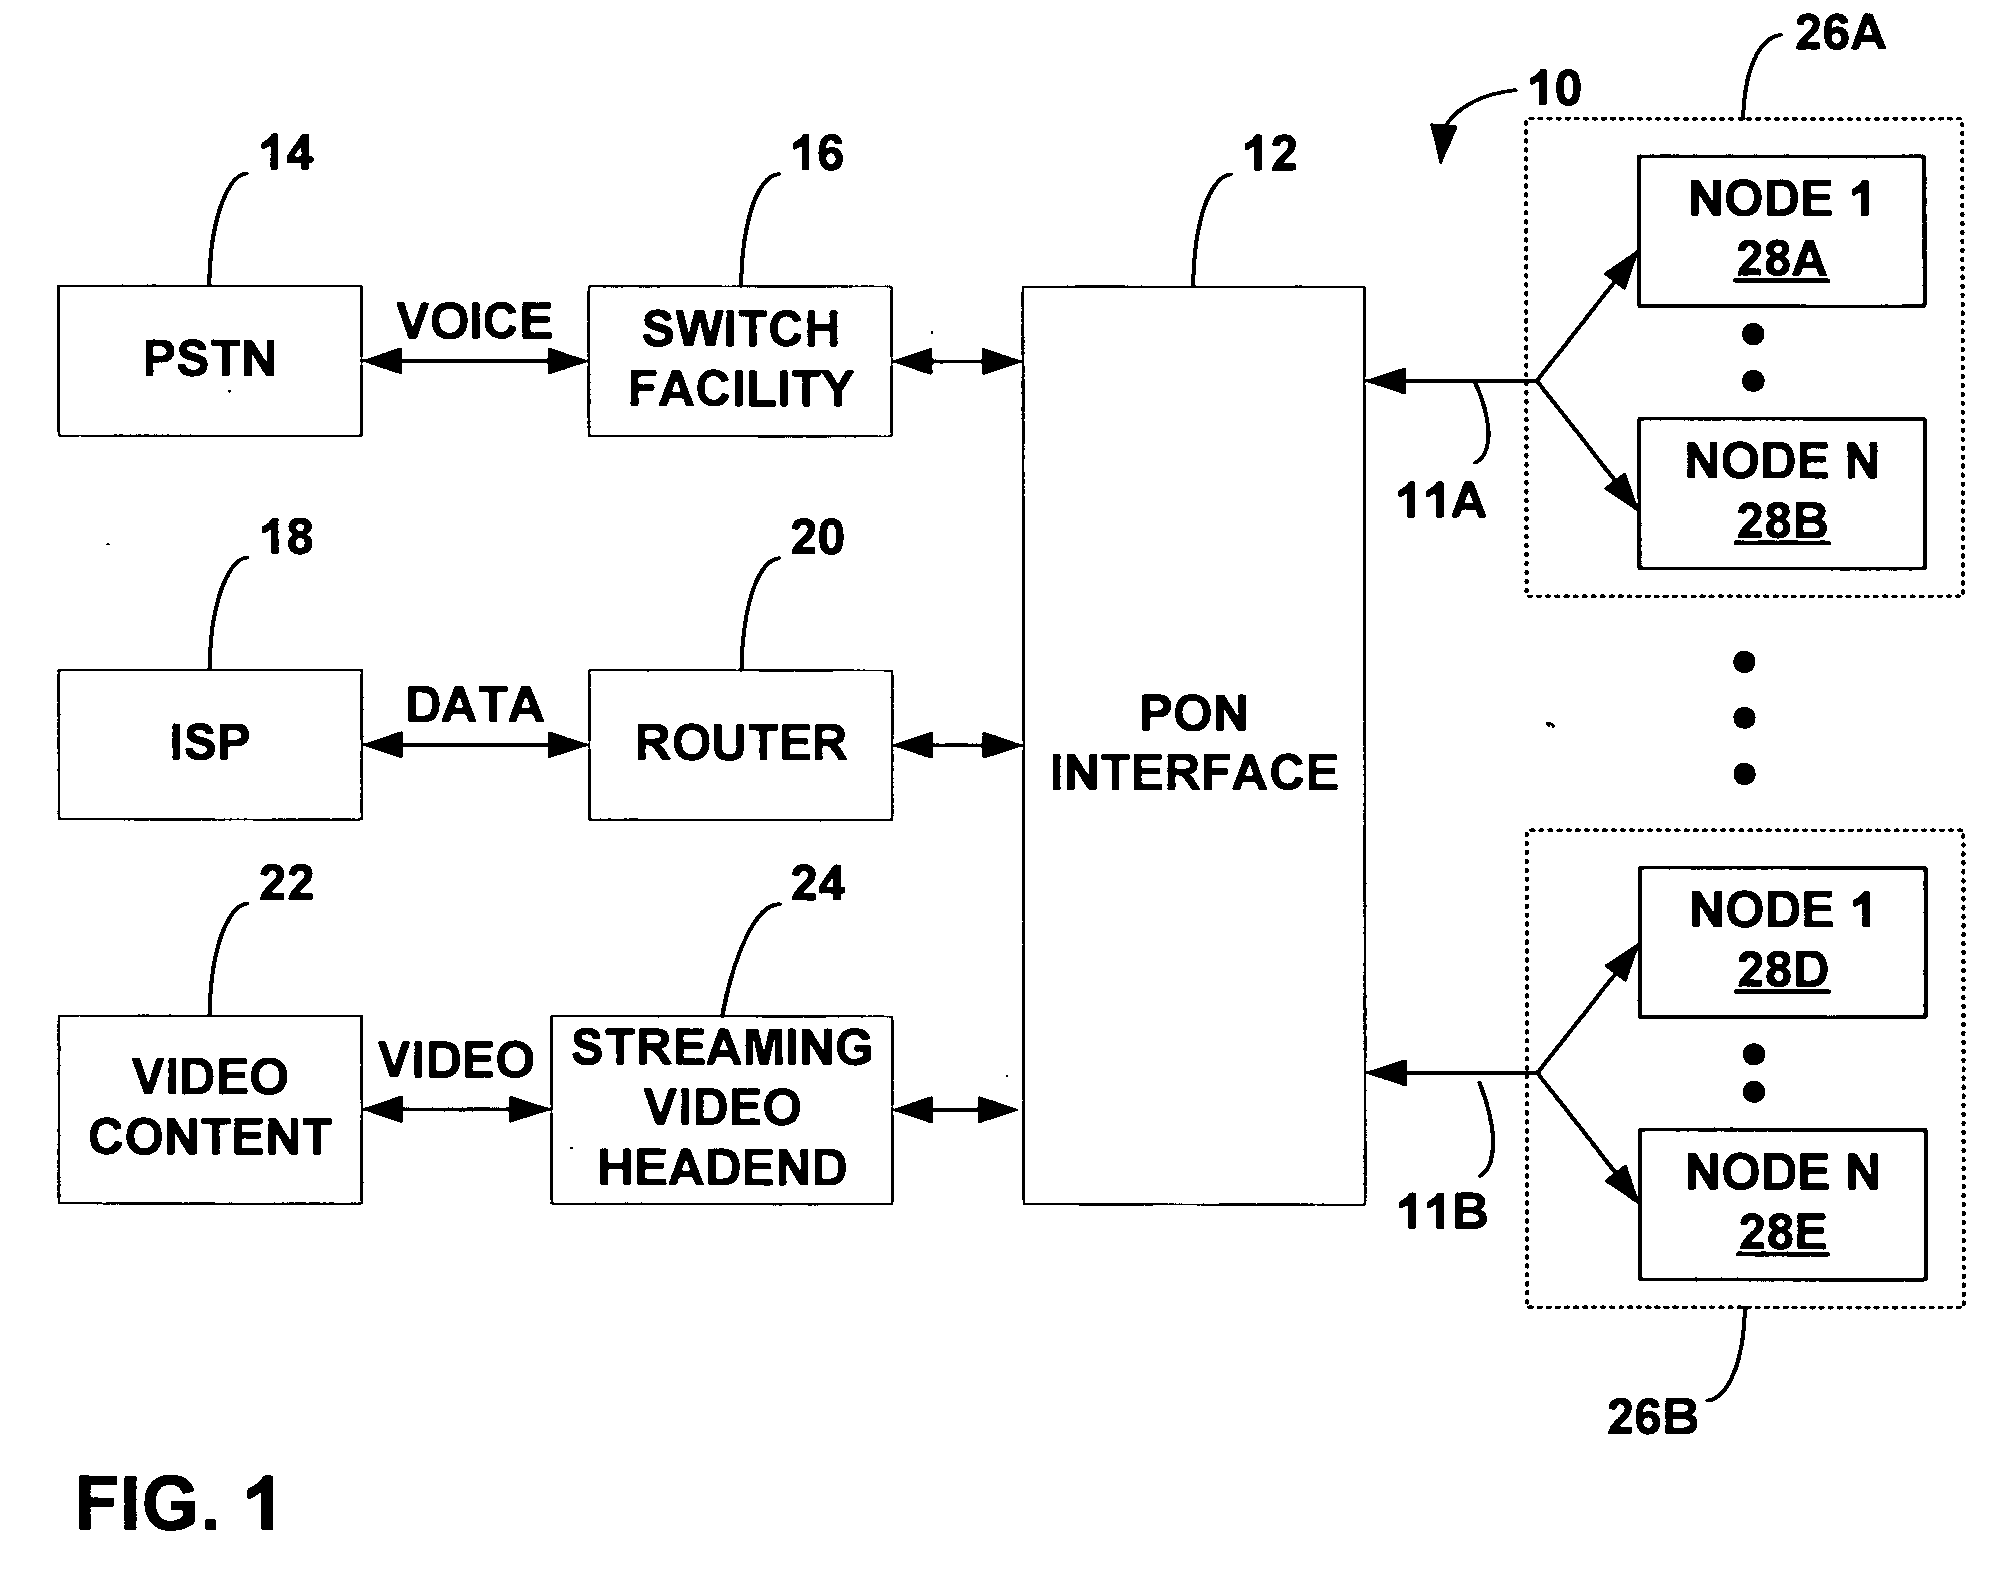 Network address assignment in a passive optical network